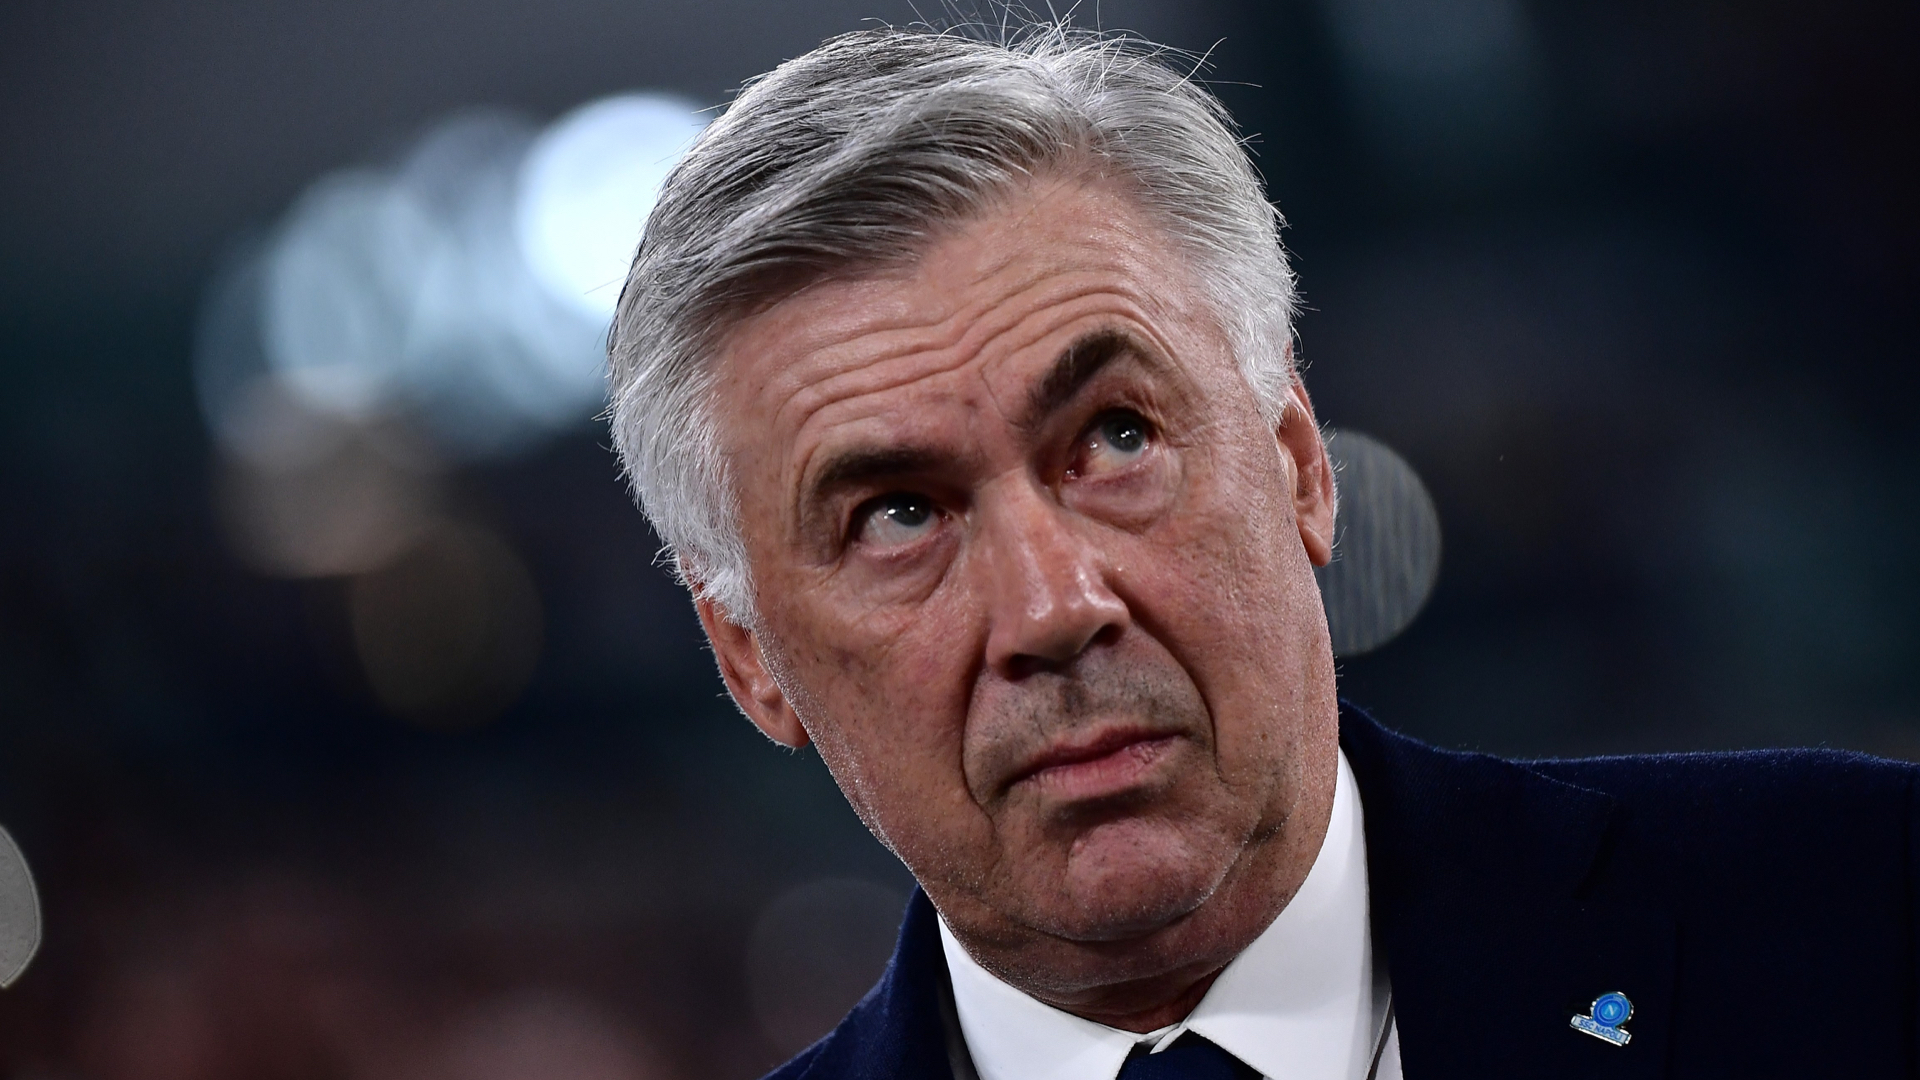 Ancelotti dismisses Napoli exit rumours as 'lies' and denies rift with Insigne